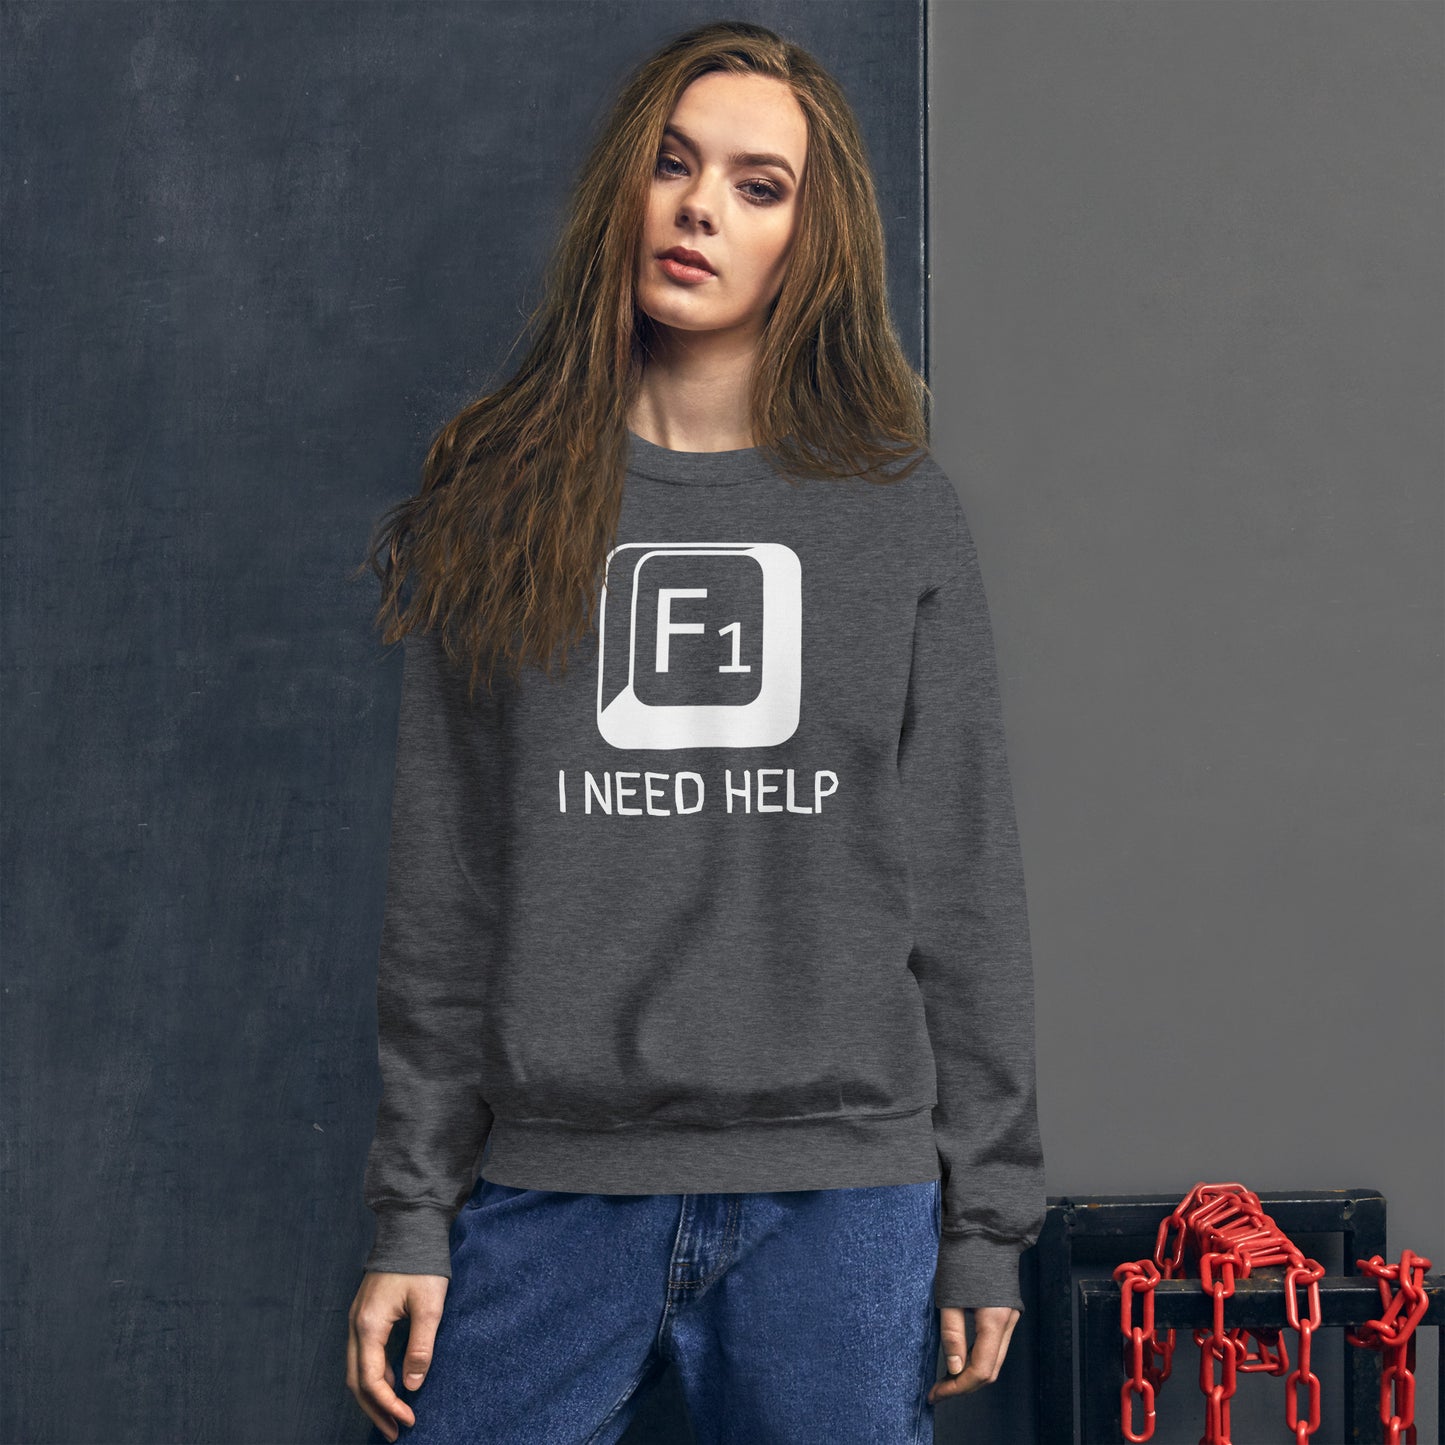 Women with dark heather sweatshirt and a picture of F1 key with text "I need help"